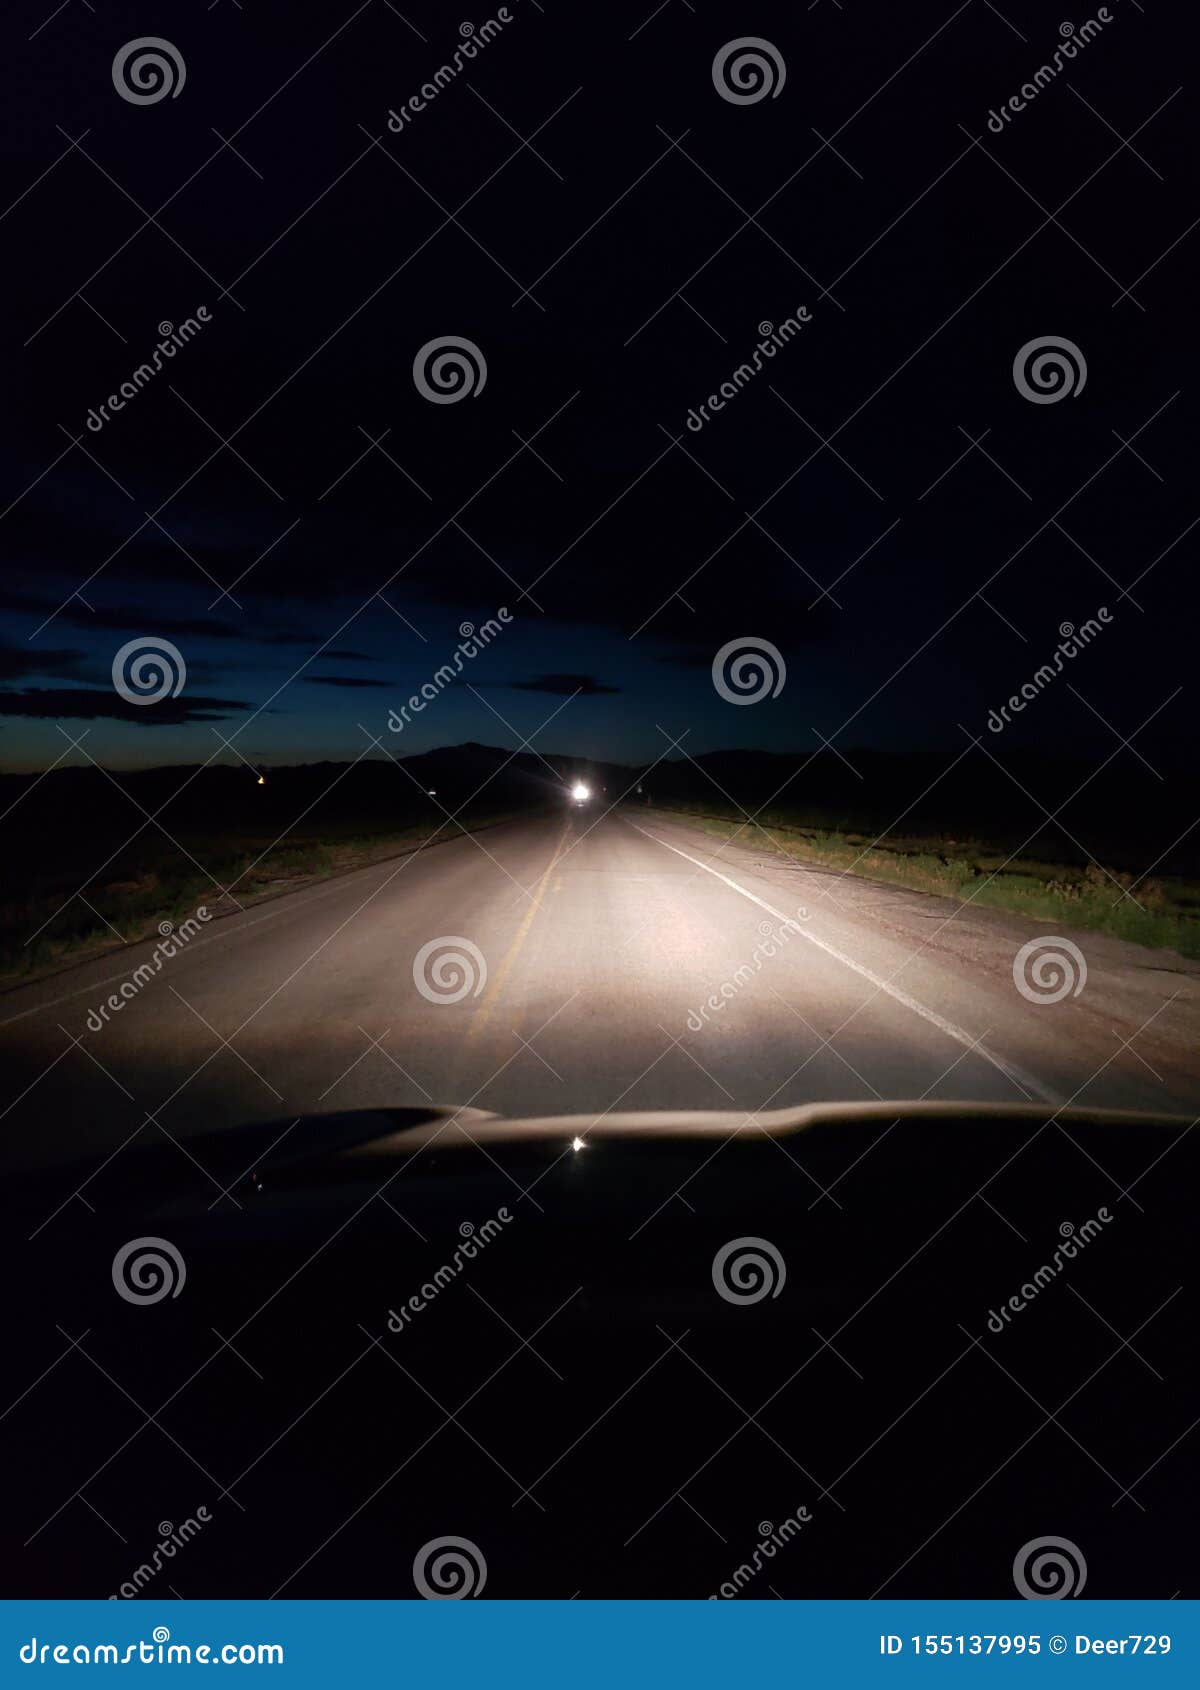 night driving on a two lane rural road